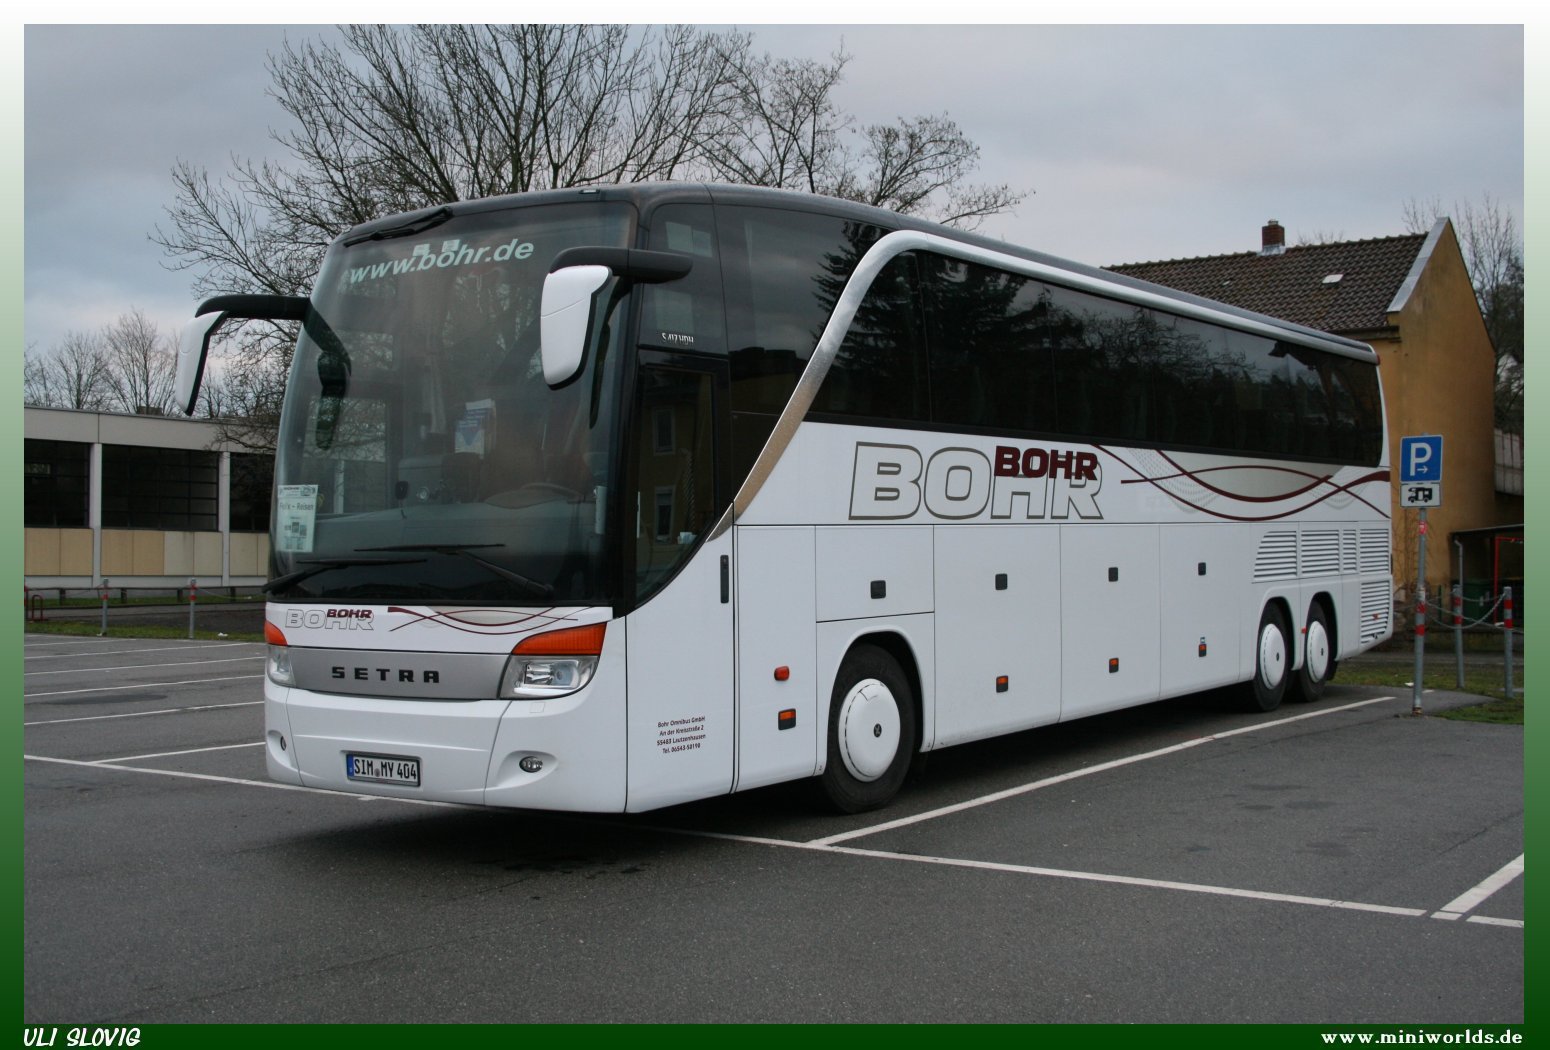 Setra S 417 HDH "Bohr" | Flickr - Photo Sharing!